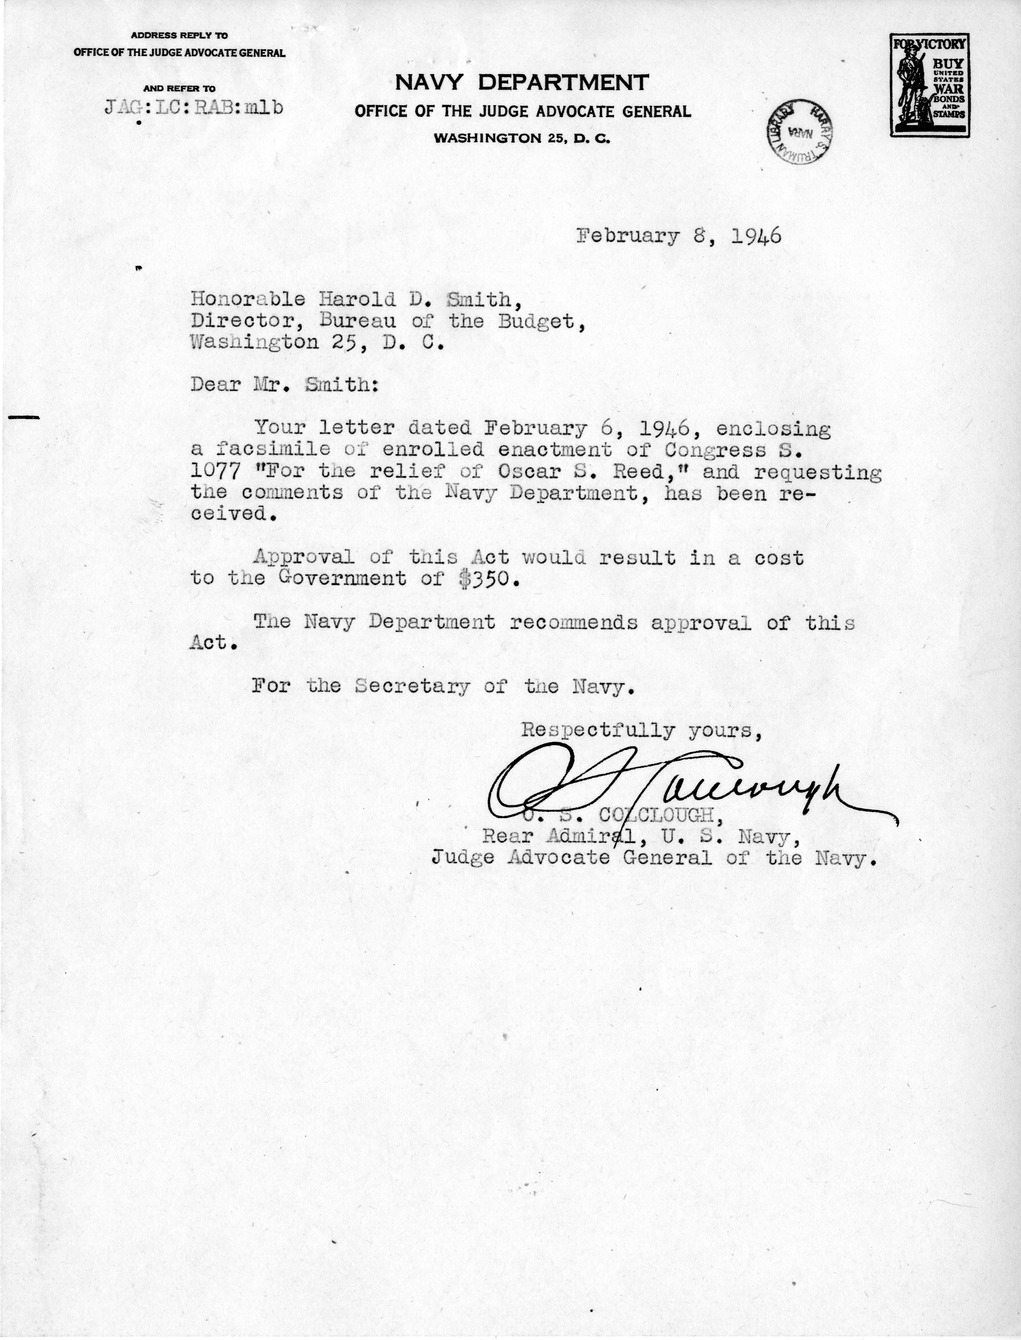 Memorandum from Frederick J. Bailey to M. C. Latta, S. 1077, For the Relief of Oscar S. Reed, with Attachments